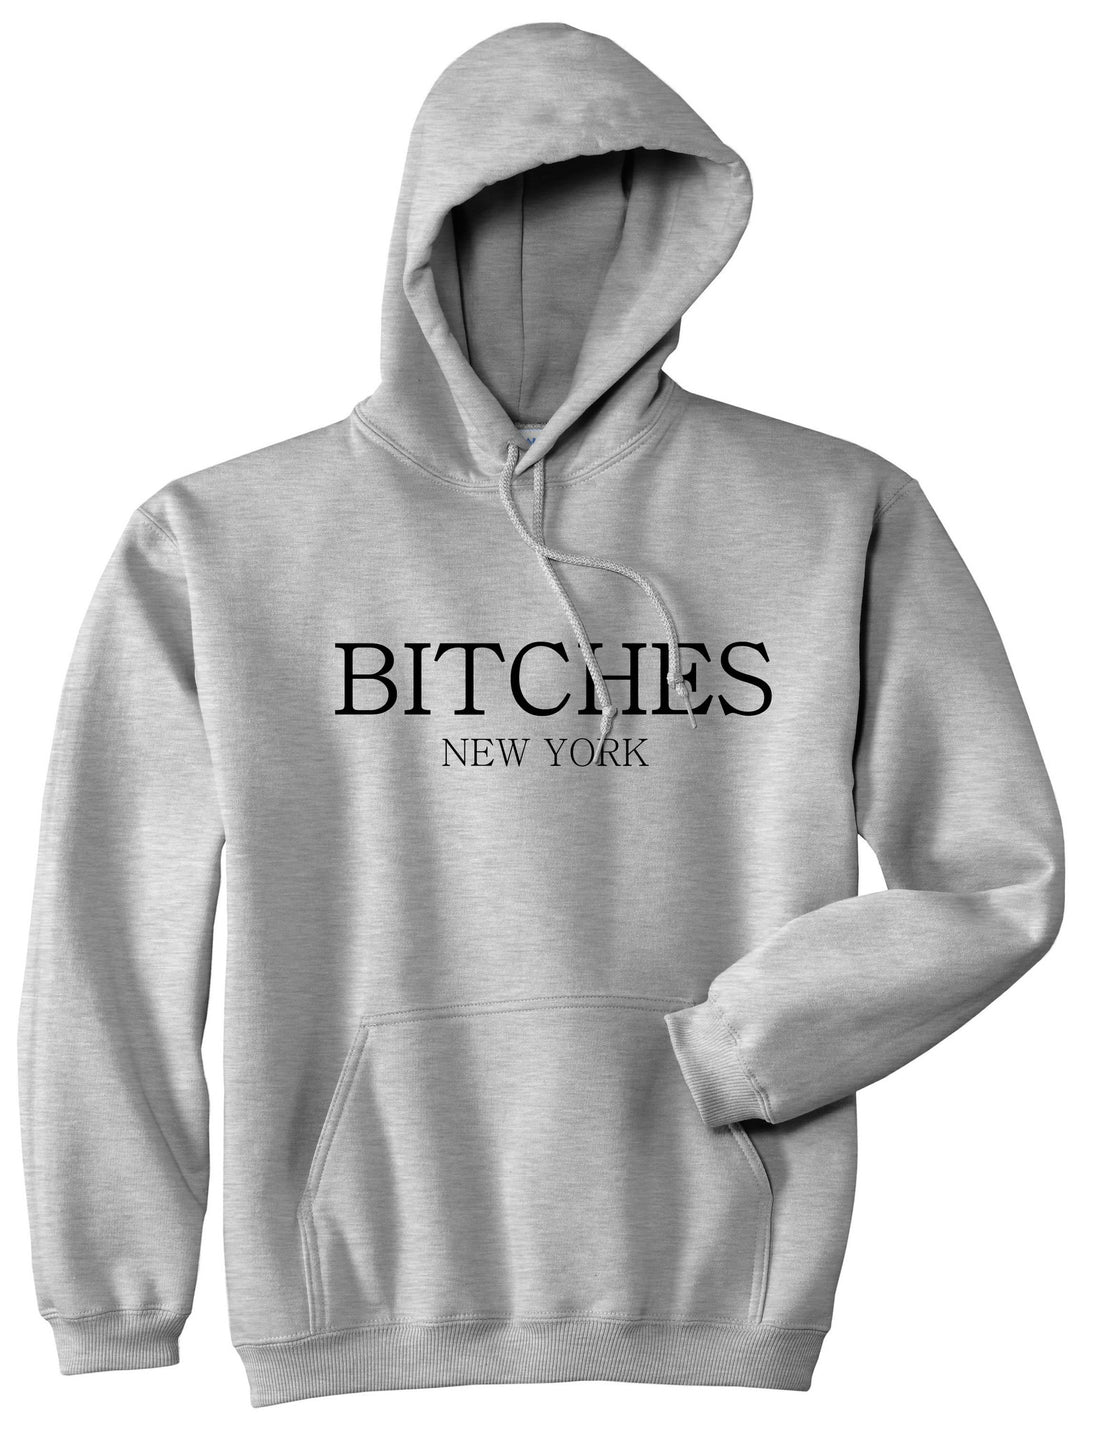  Bitches New York Pullover Hoodie Hoody in Grey by Kings Of NY